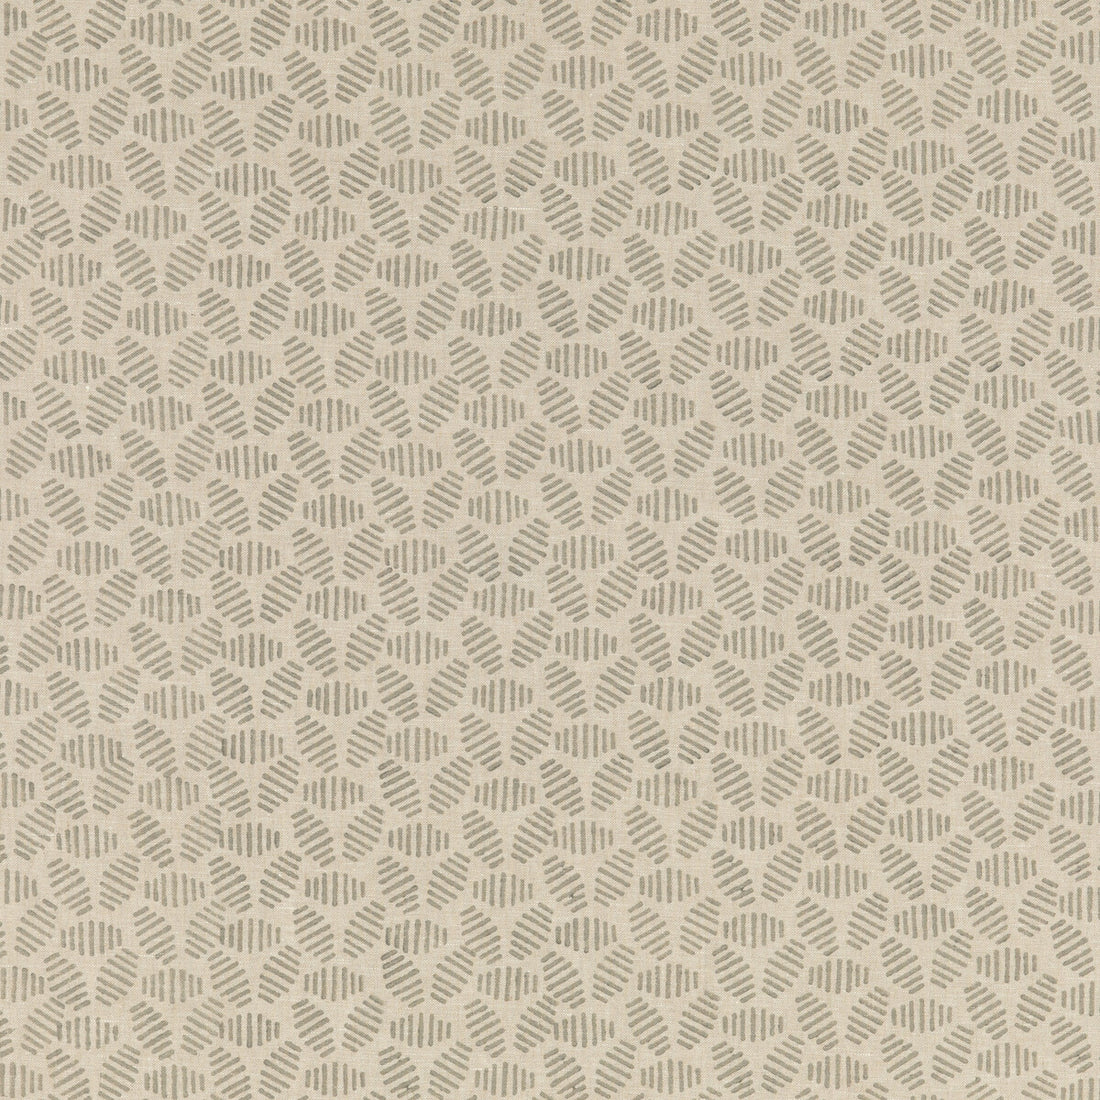 Bumble Bee fabric in stone color - pattern PP50482.4.0 - by Baker Lifestyle in the Block Party collection